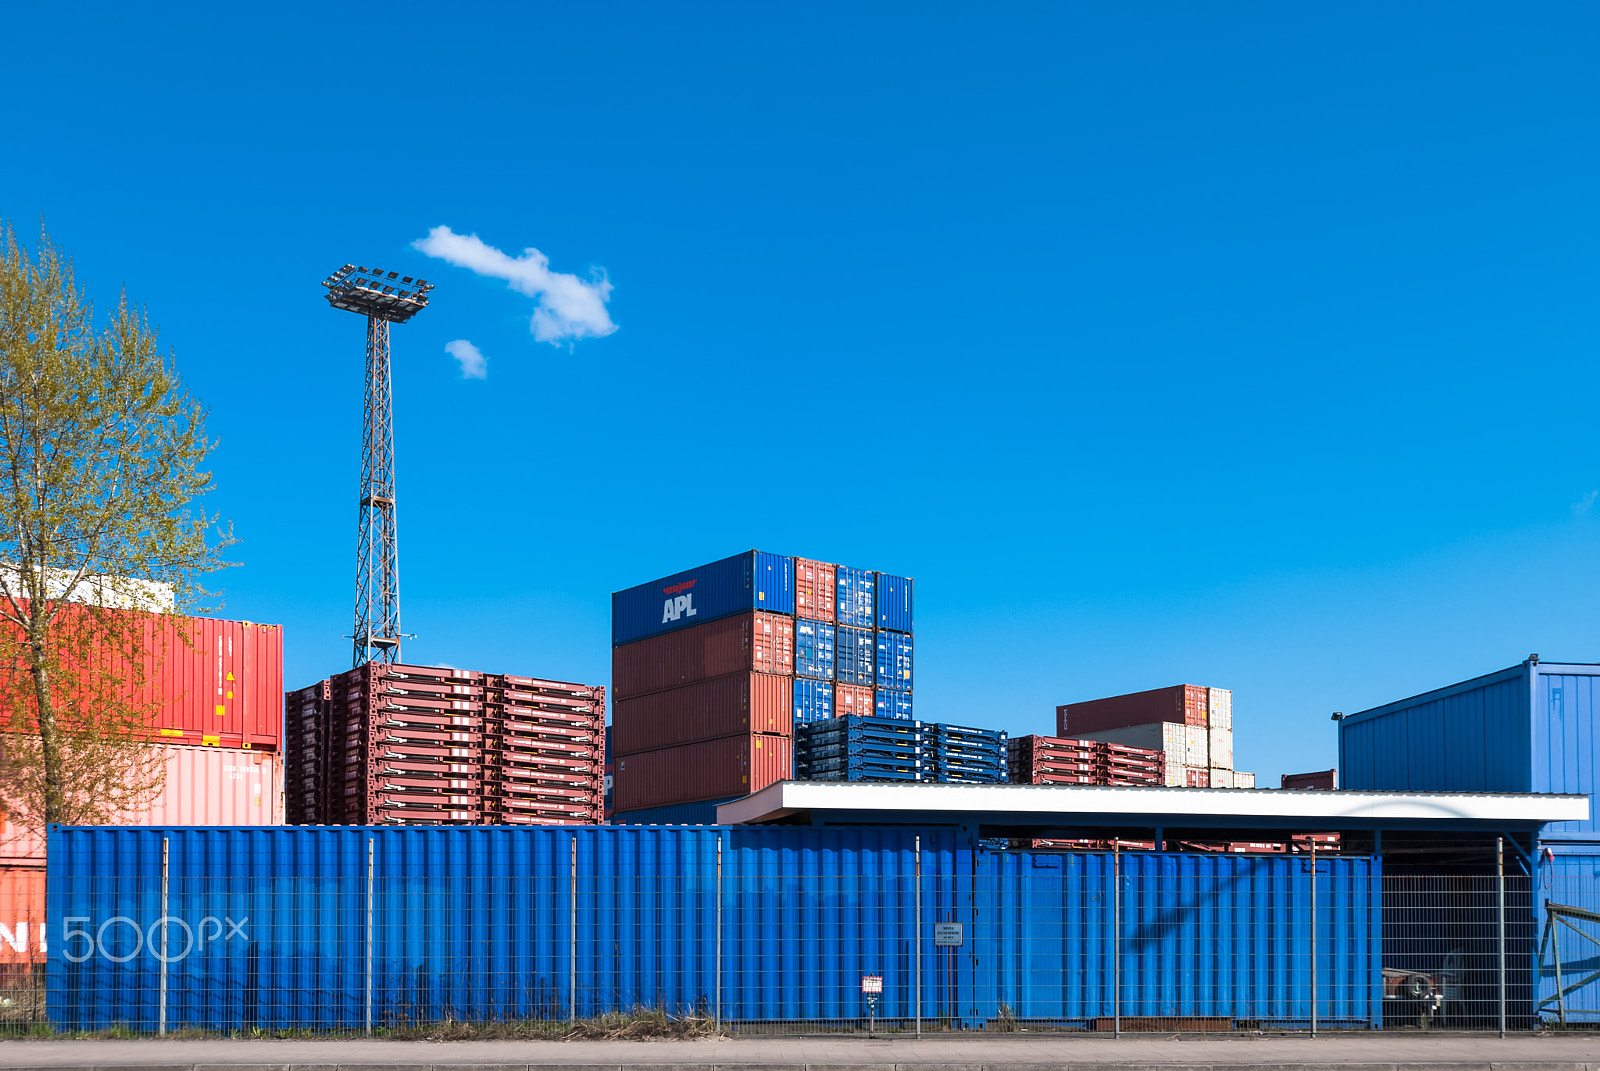 Nikon D80 + Nikon AF-S DX Nikkor 10-24mm F3-5-4.5G ED sample photo. Hamburg, germany - may 1, 2013: cargo container stacked at the port area. photography